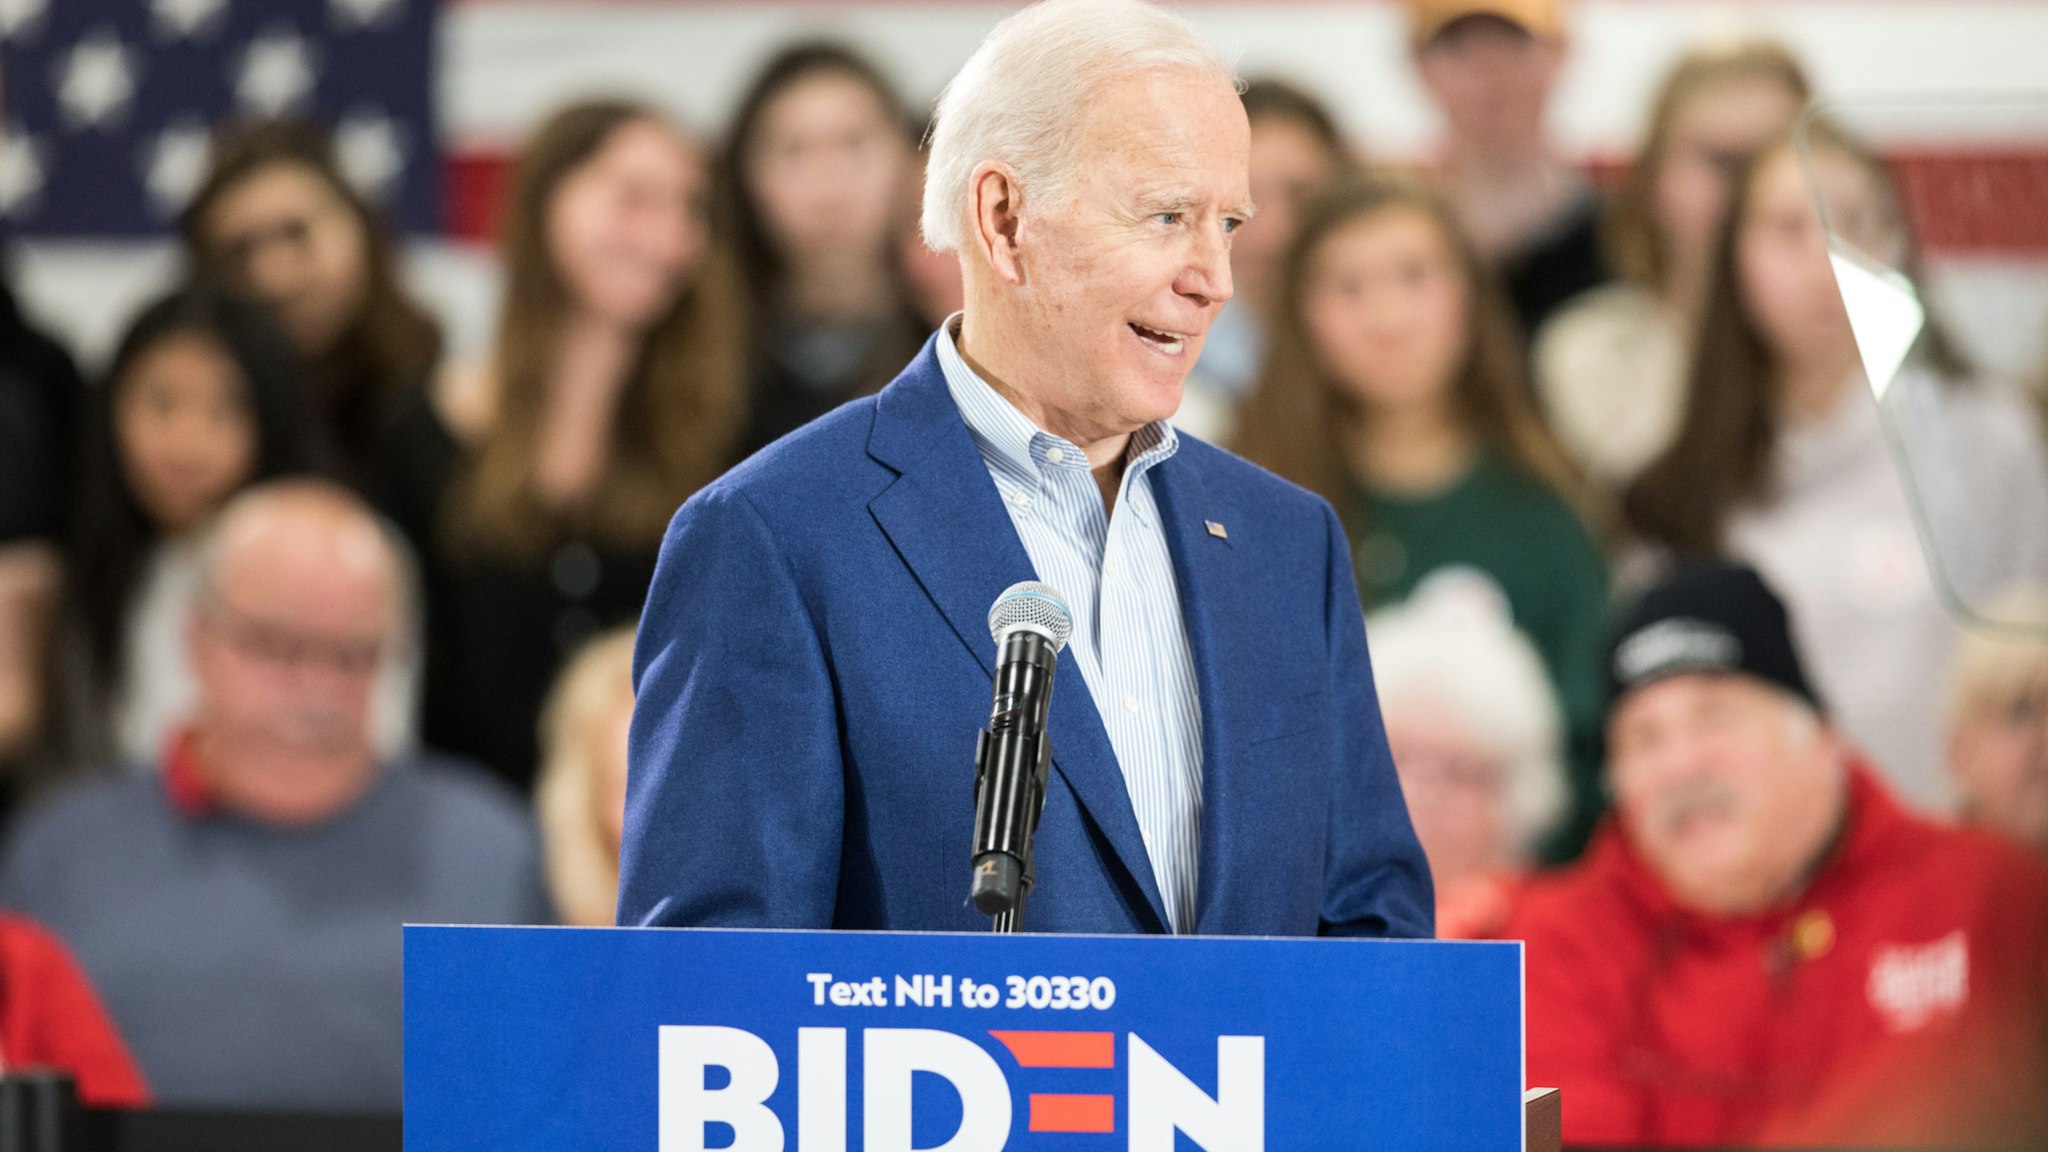 MANCHESTER, NH - FEBRUARY 10: Democratic presidential candidate former Vice President Joe Biden speaks during a campaign event on February 10, 2020 in Manchester, New Hampshire. New Hampshire holds its first in the nation primary tomorrow. (Photo by Scott Eisen/Getty Images)